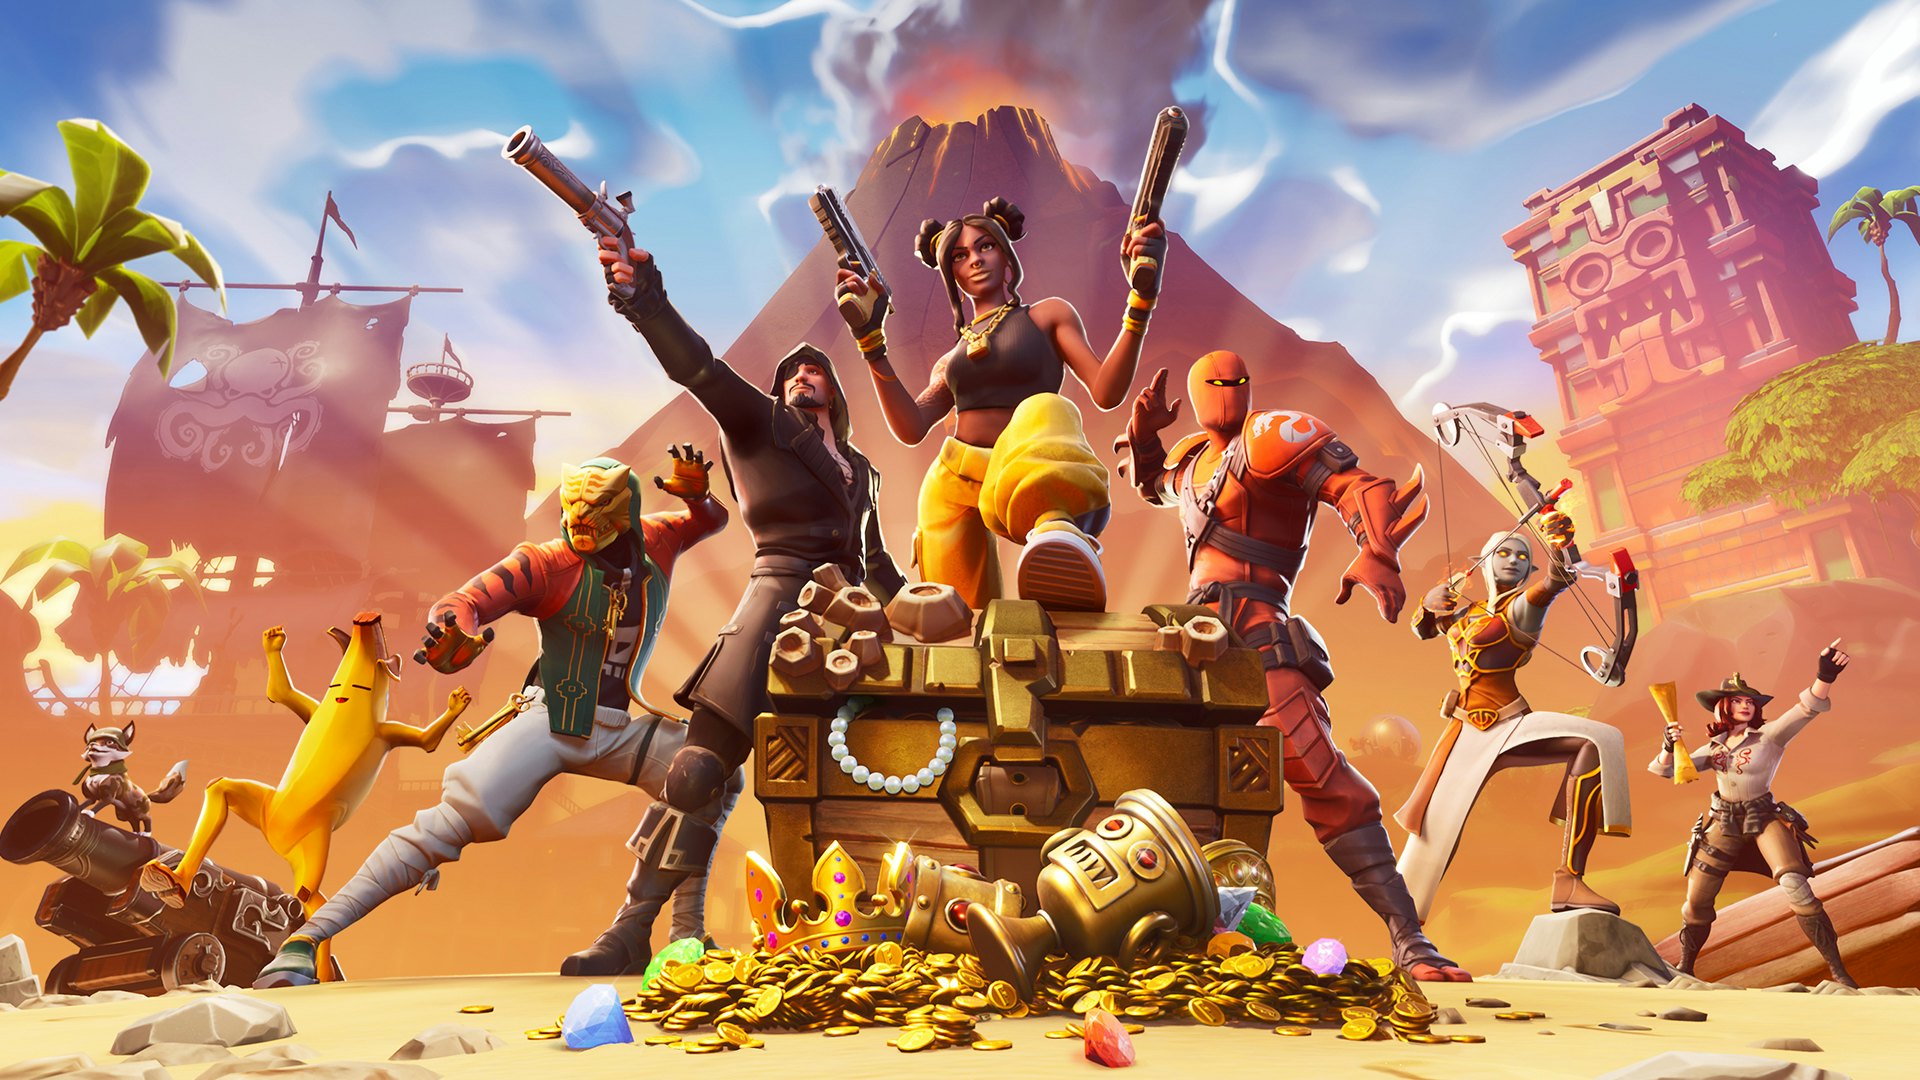 Xbox makes 'Fortnite' game free to play on iPhones